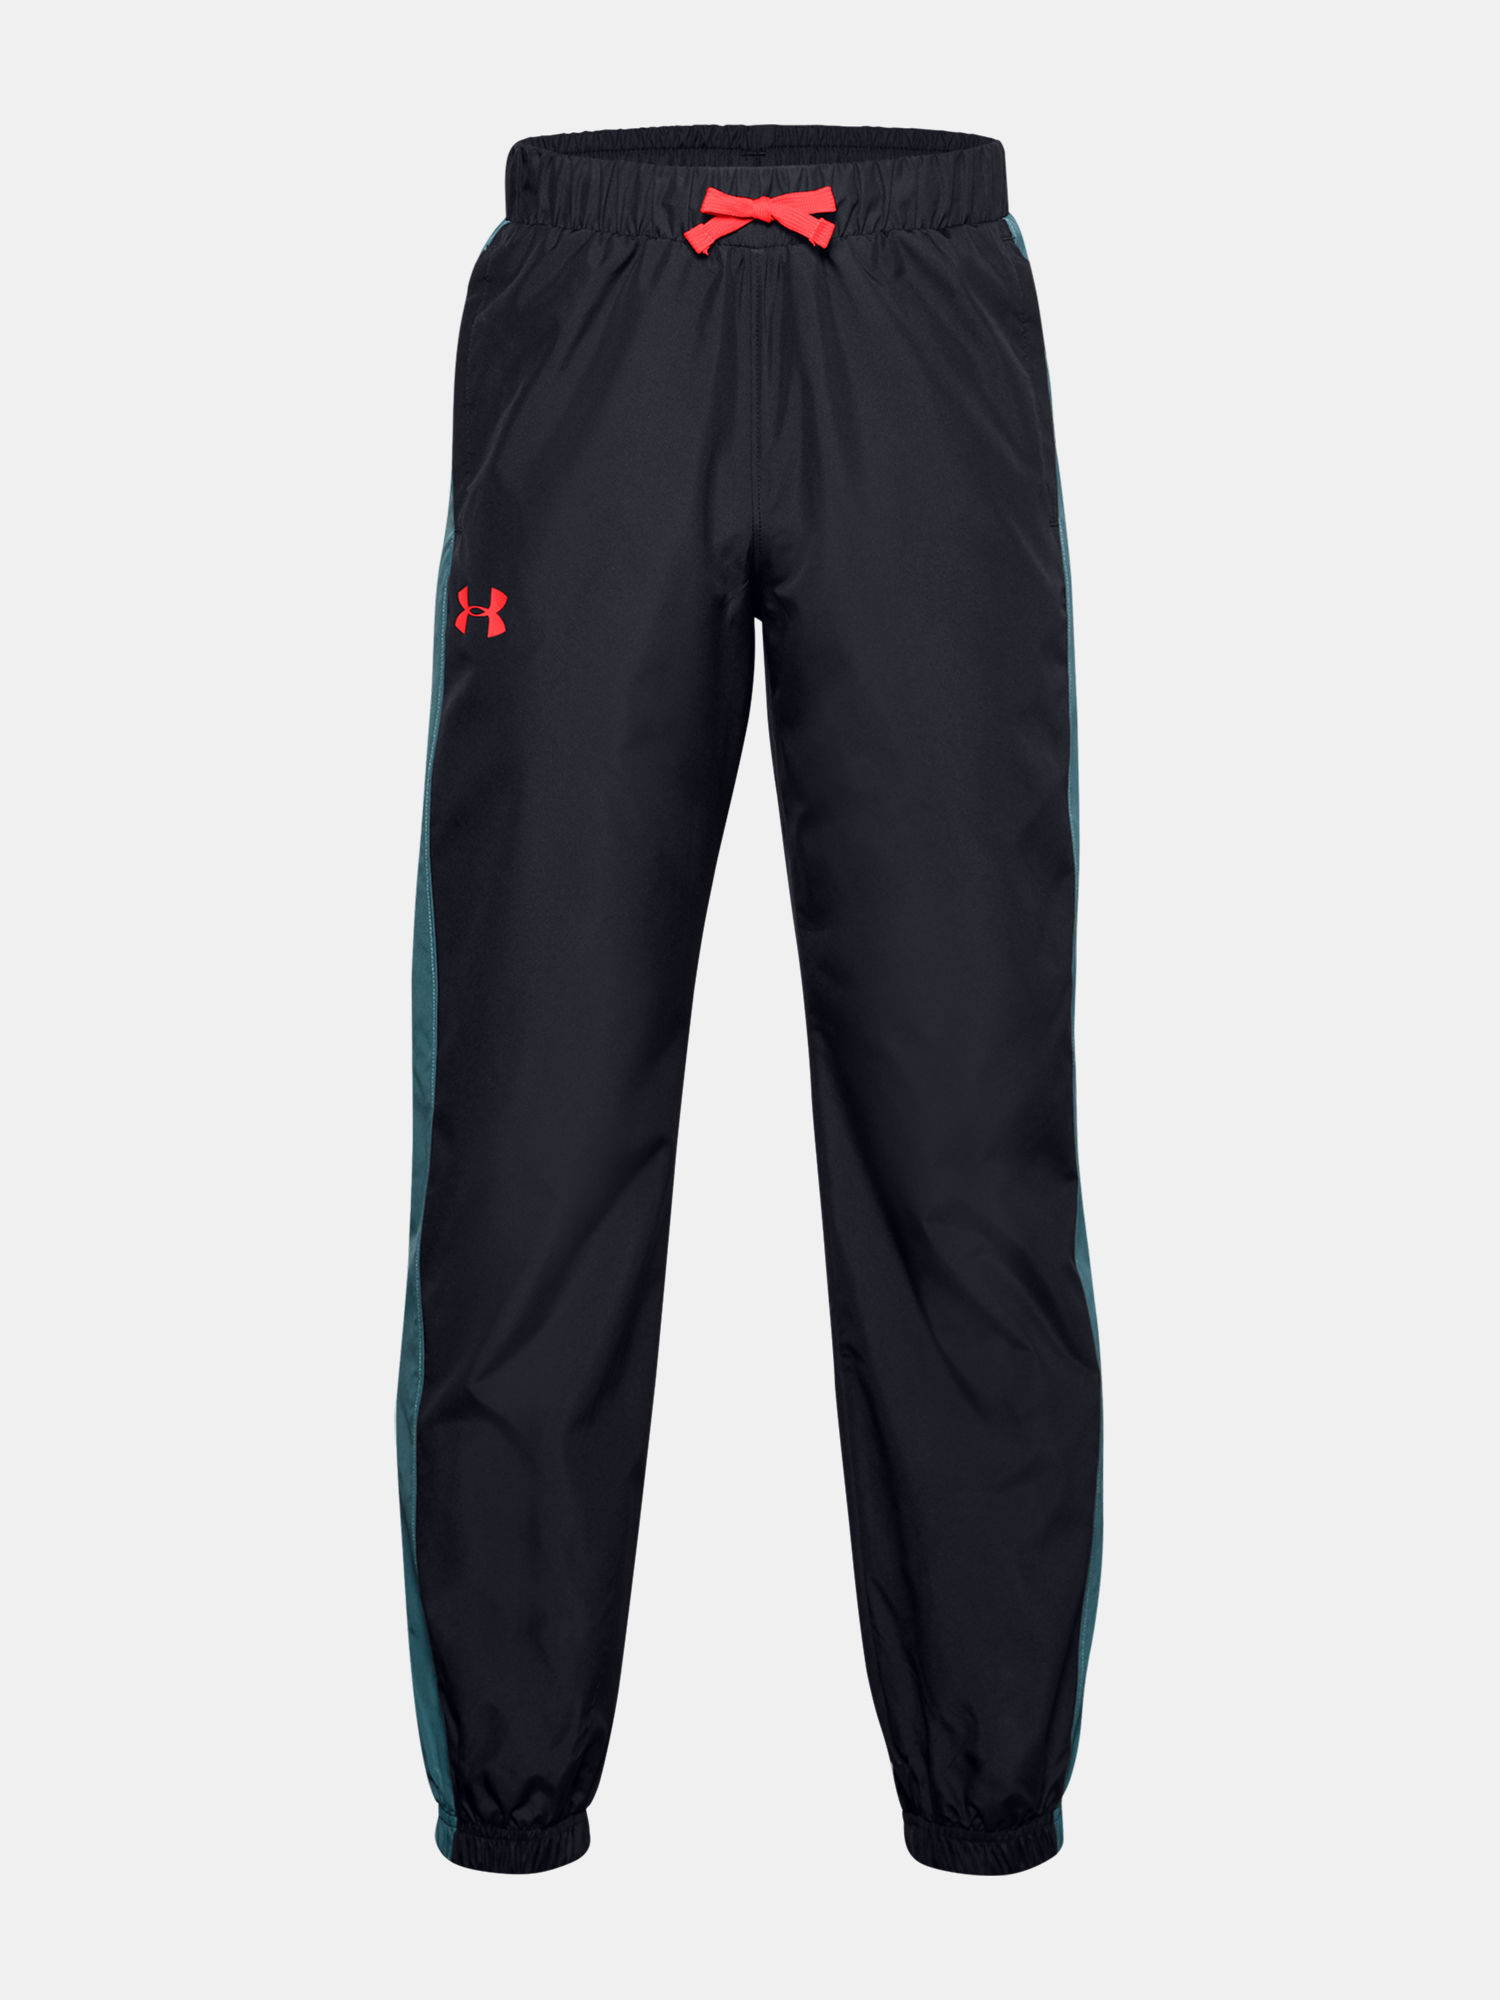 Tepláky Under Armour Mesh Lined Pants-BLK (1)